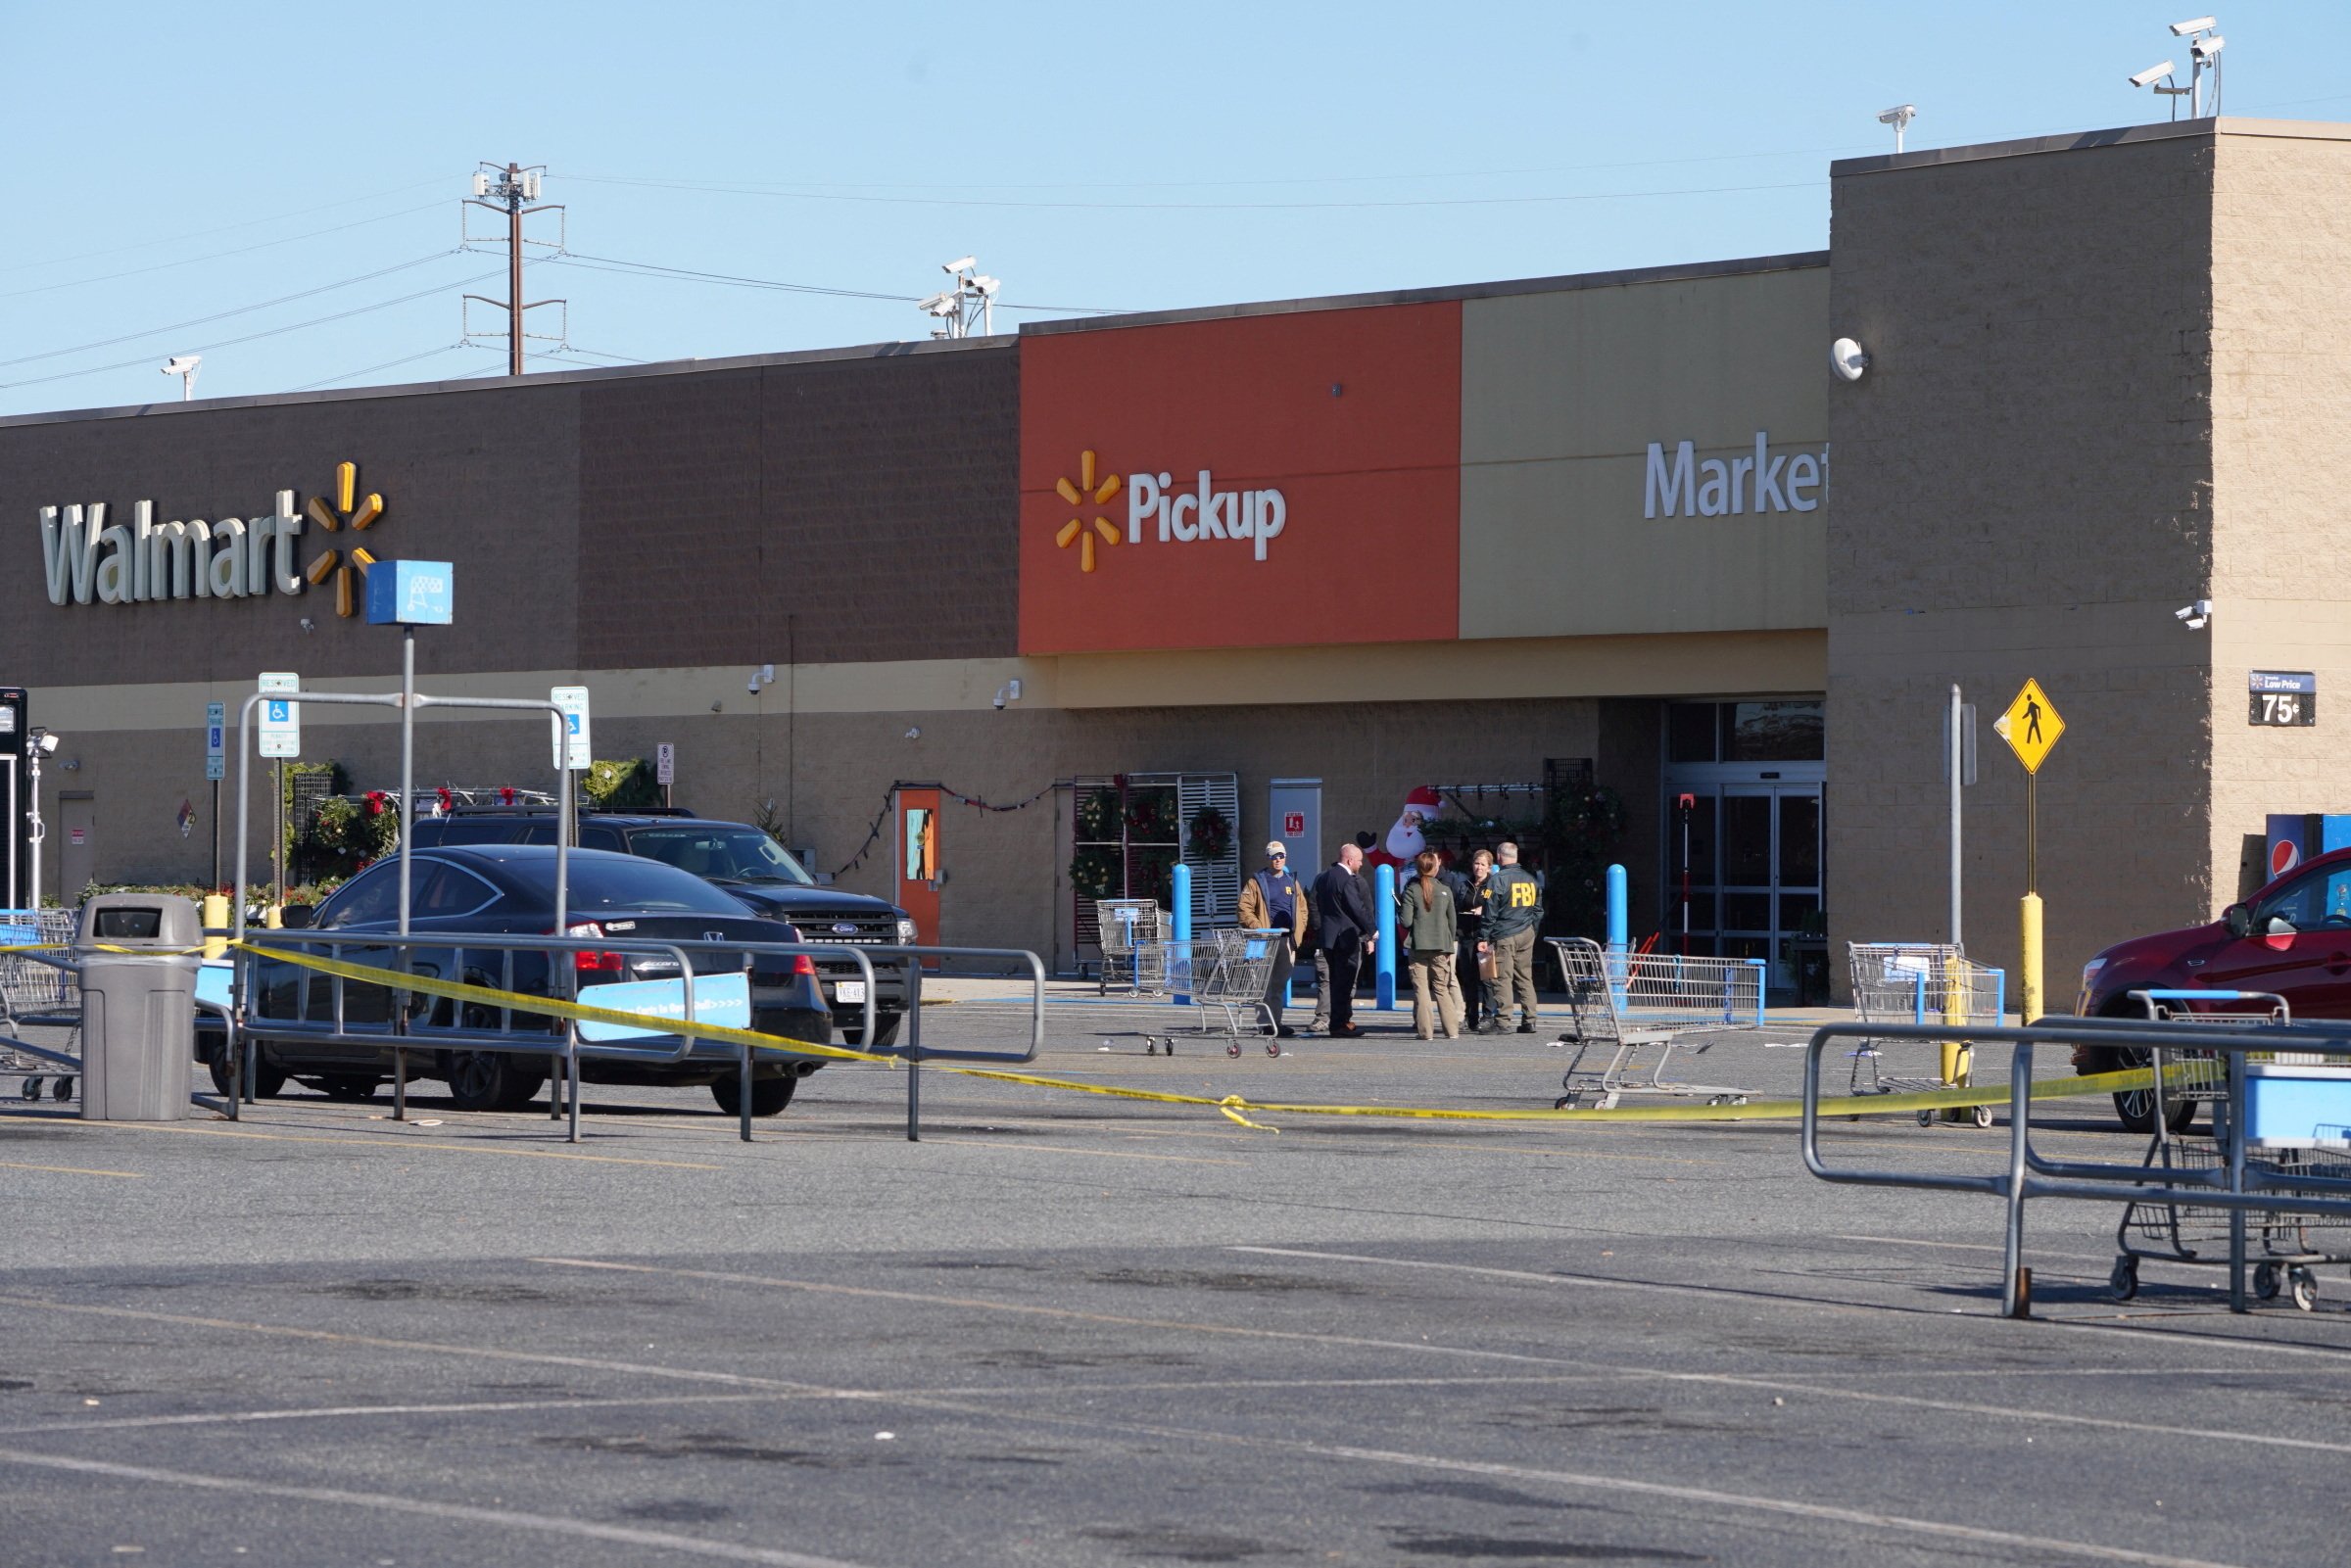 The aftermath of a mass shooting at a Walmart in Chesapeake